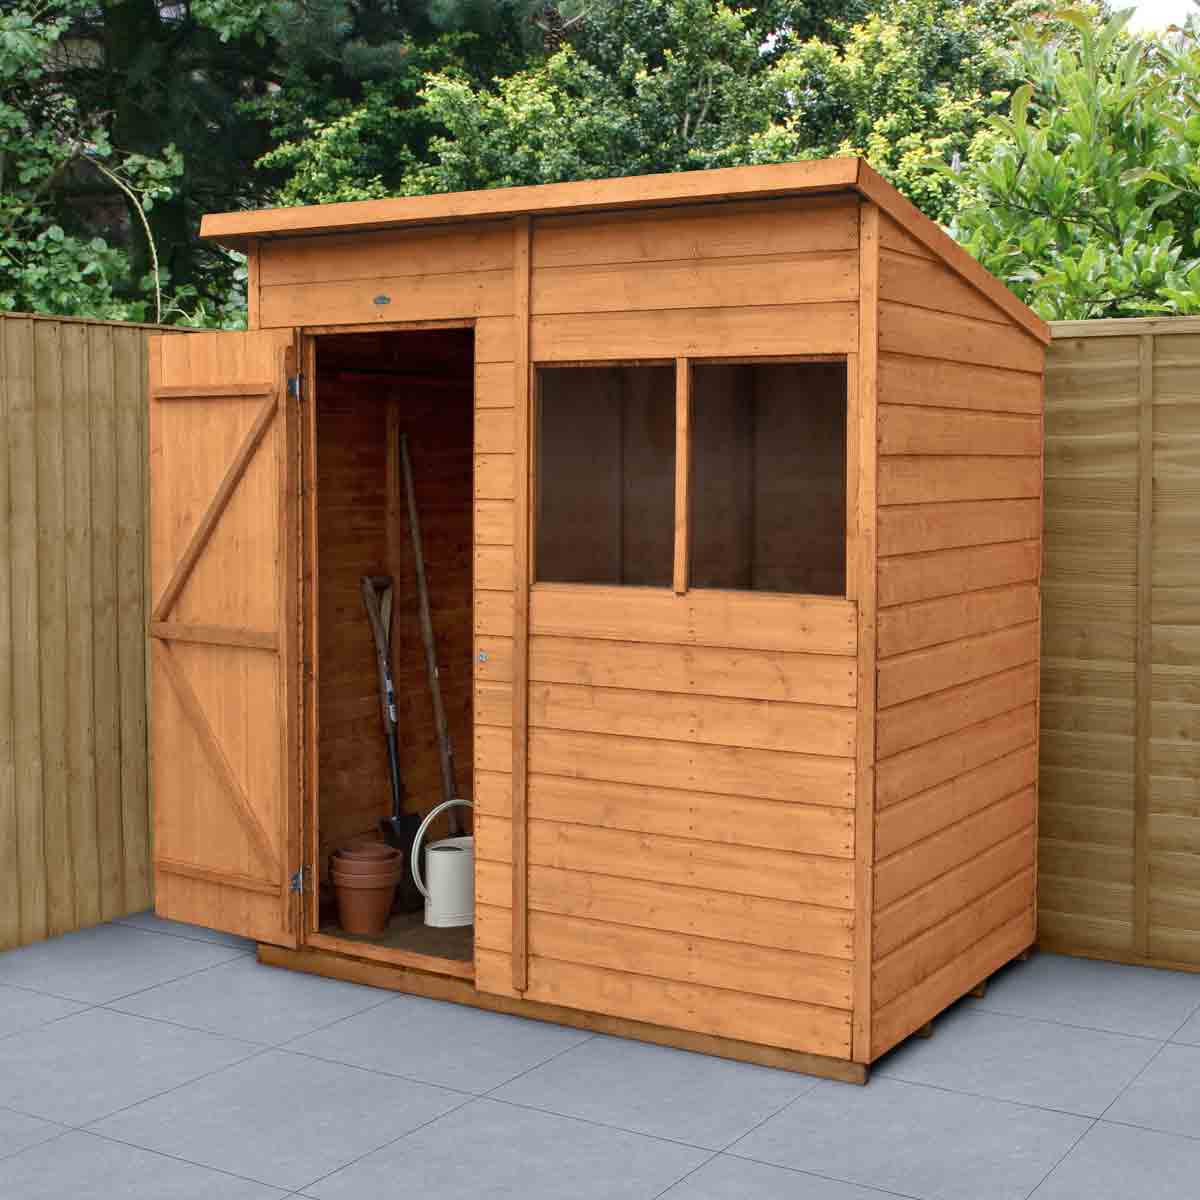 Forest Garden 6' x 4' Shiplap Dip Treated Pent Shed